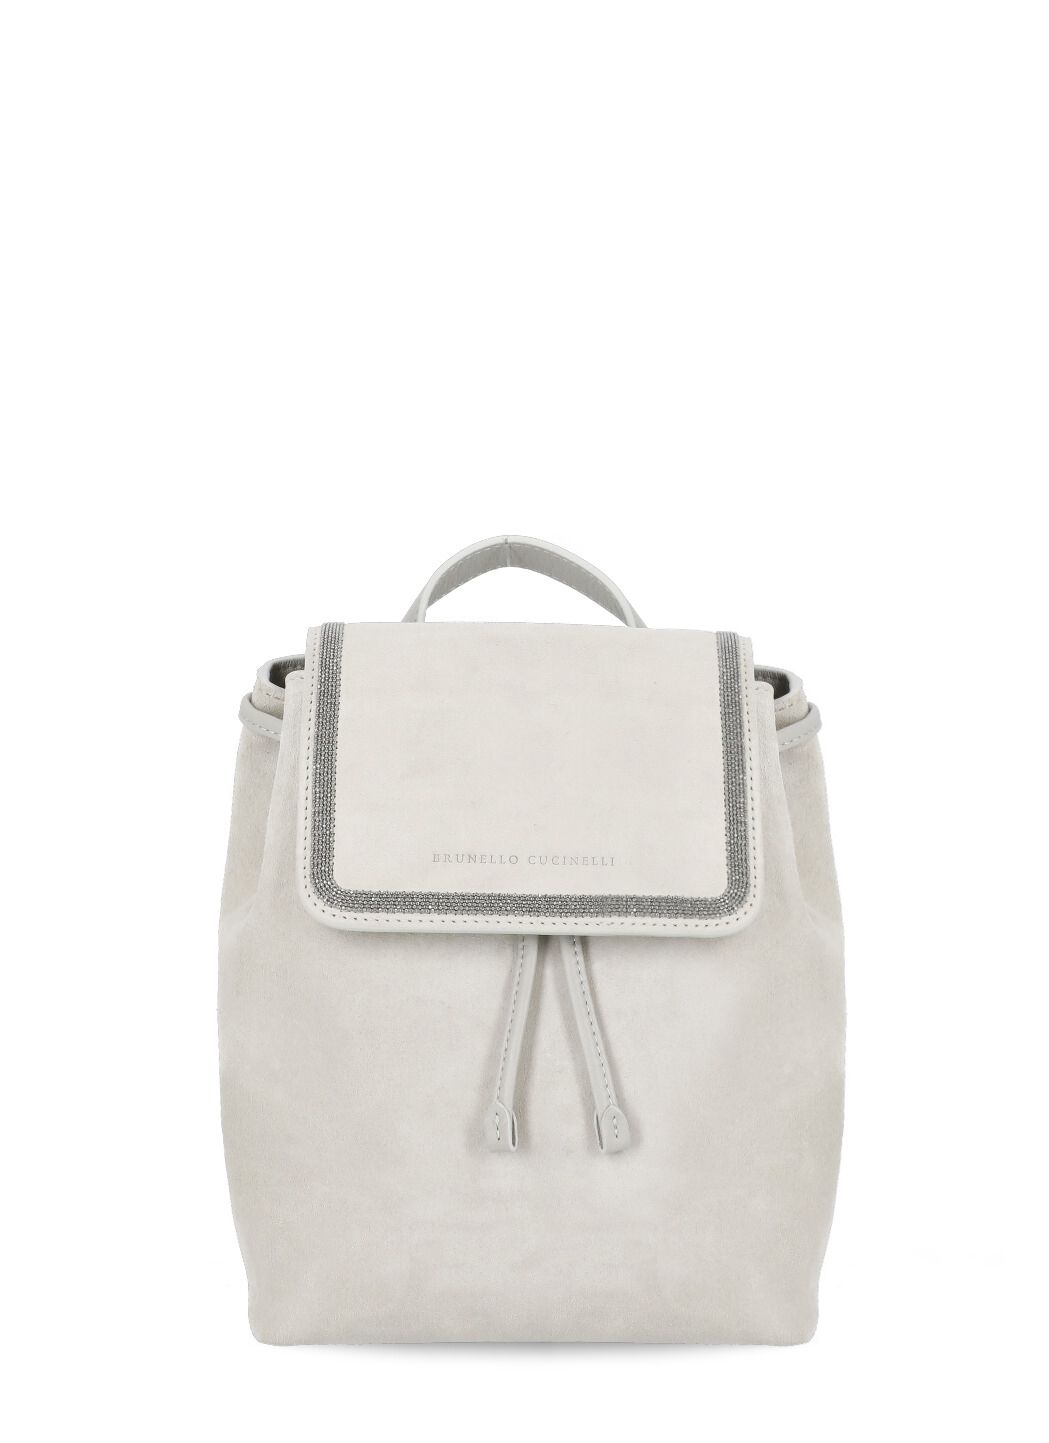 Suede leather backpack